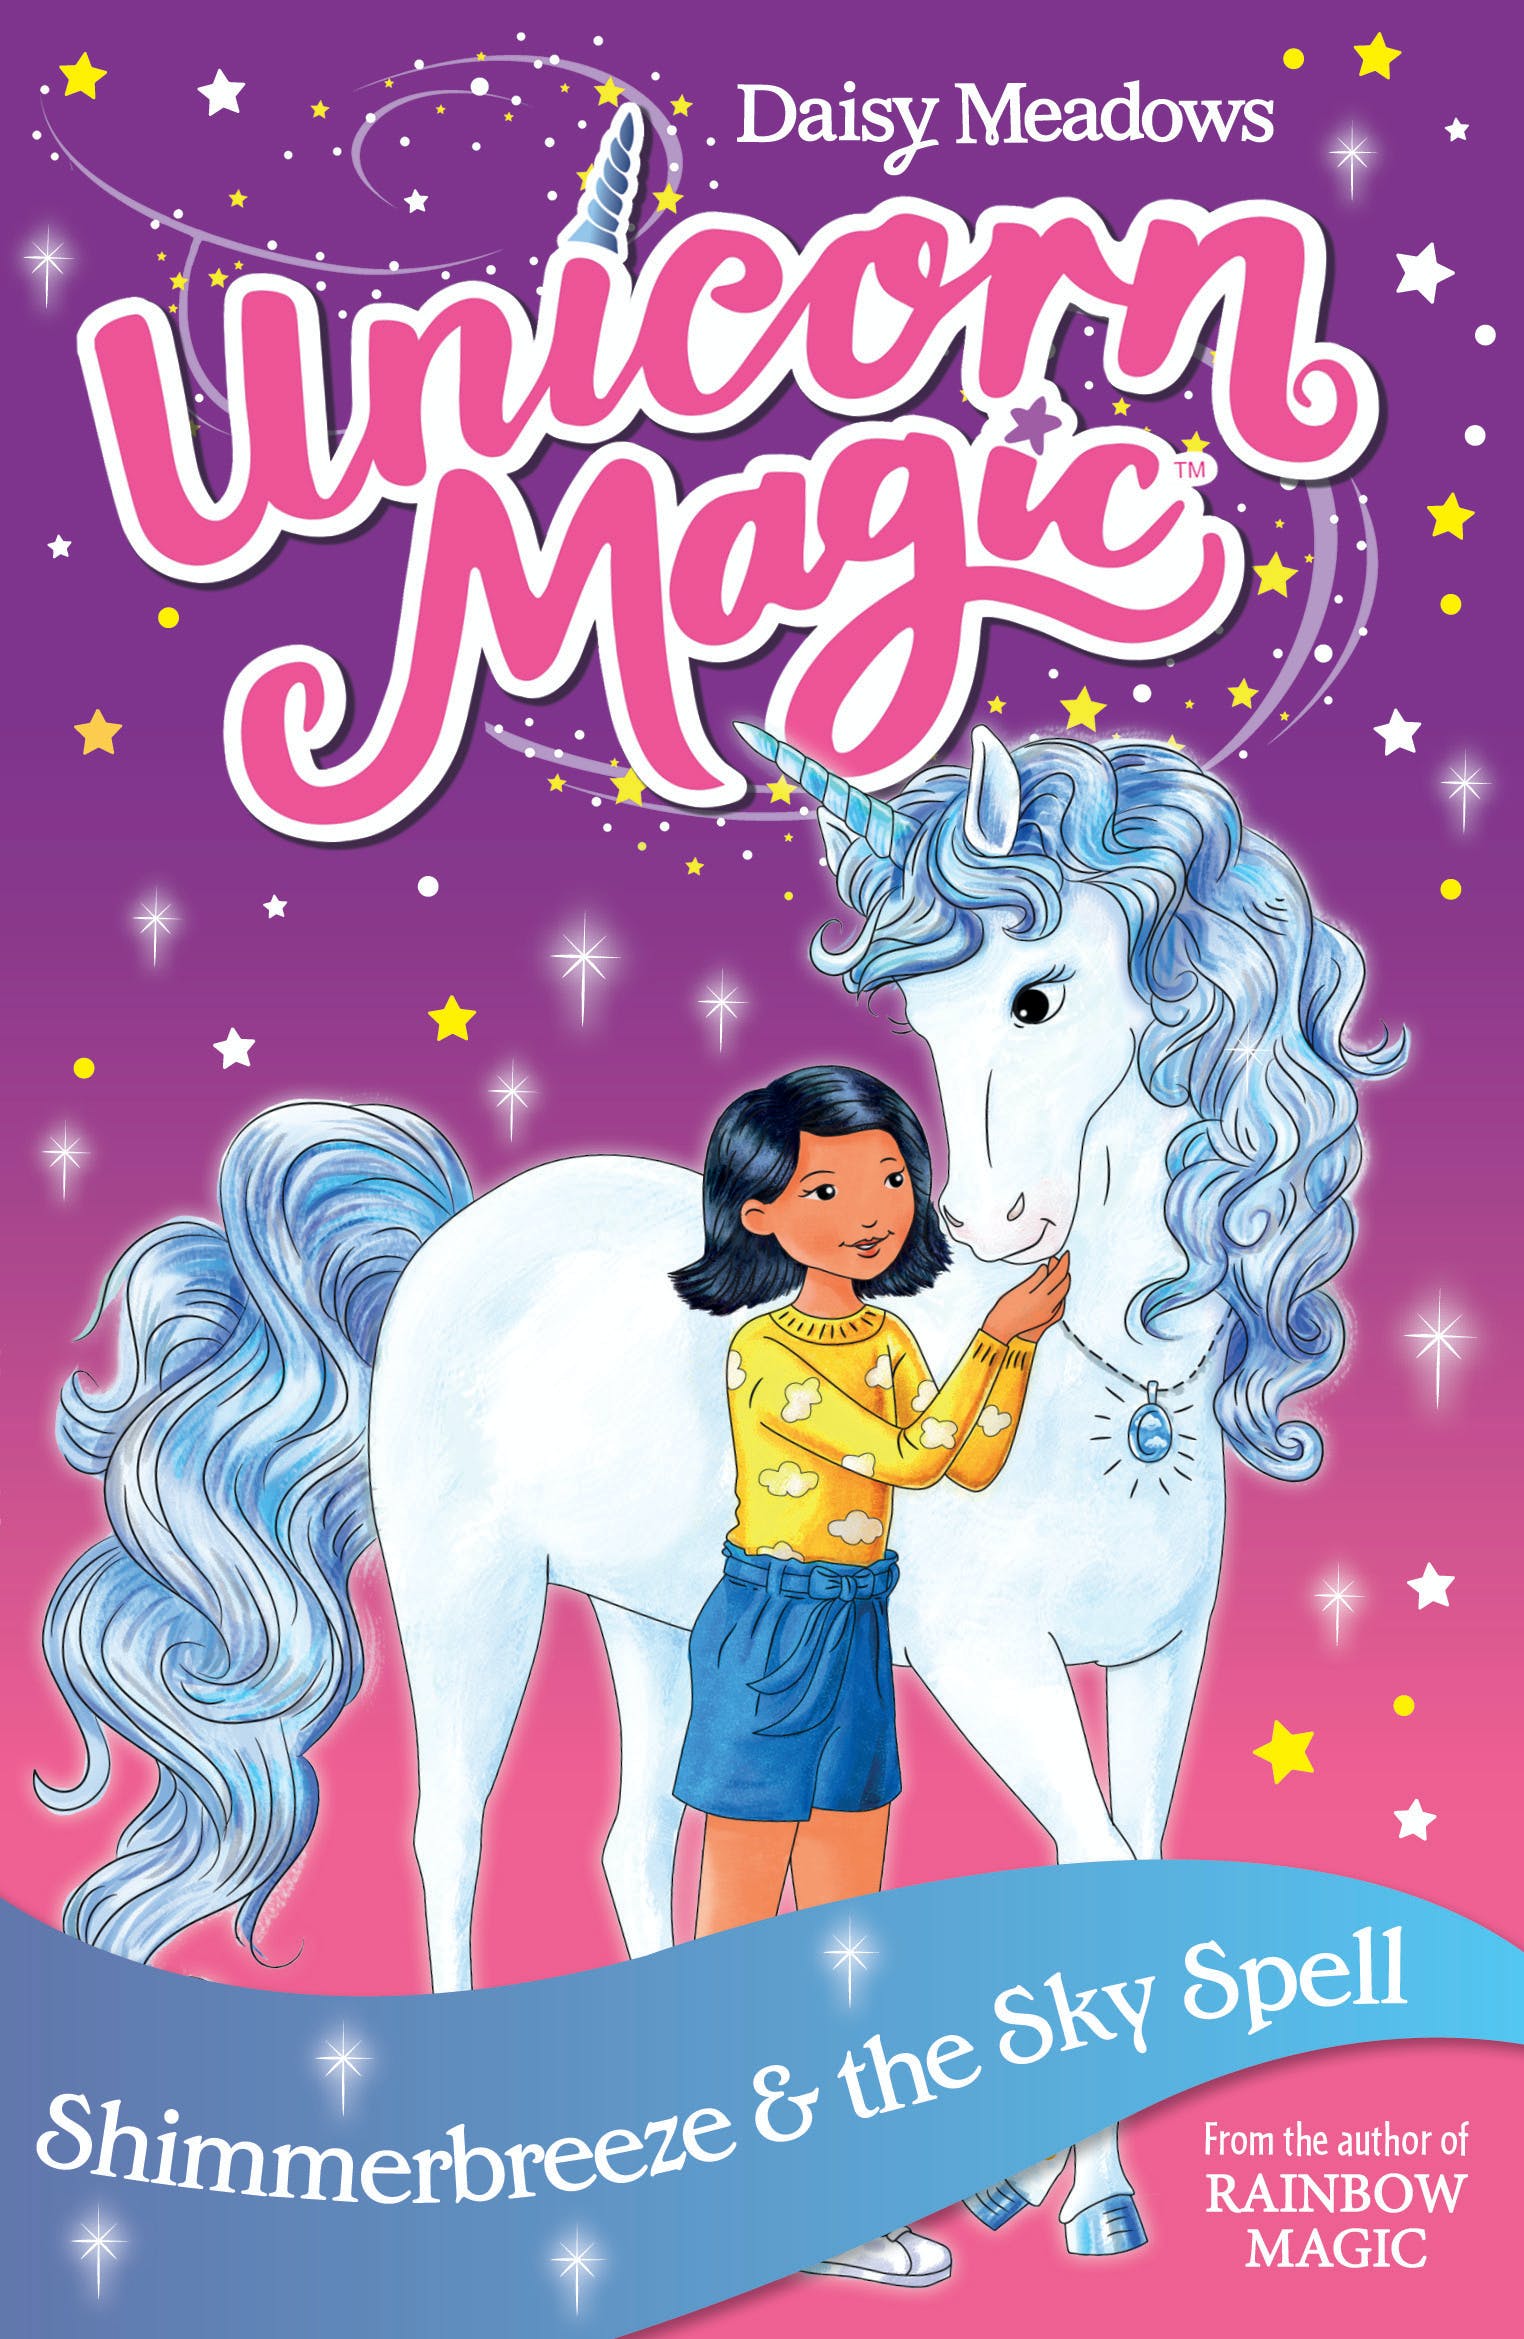 Unicorn Magic: Shimmerbreeze and the Sky Spell: Series 1 Book 2 by ...